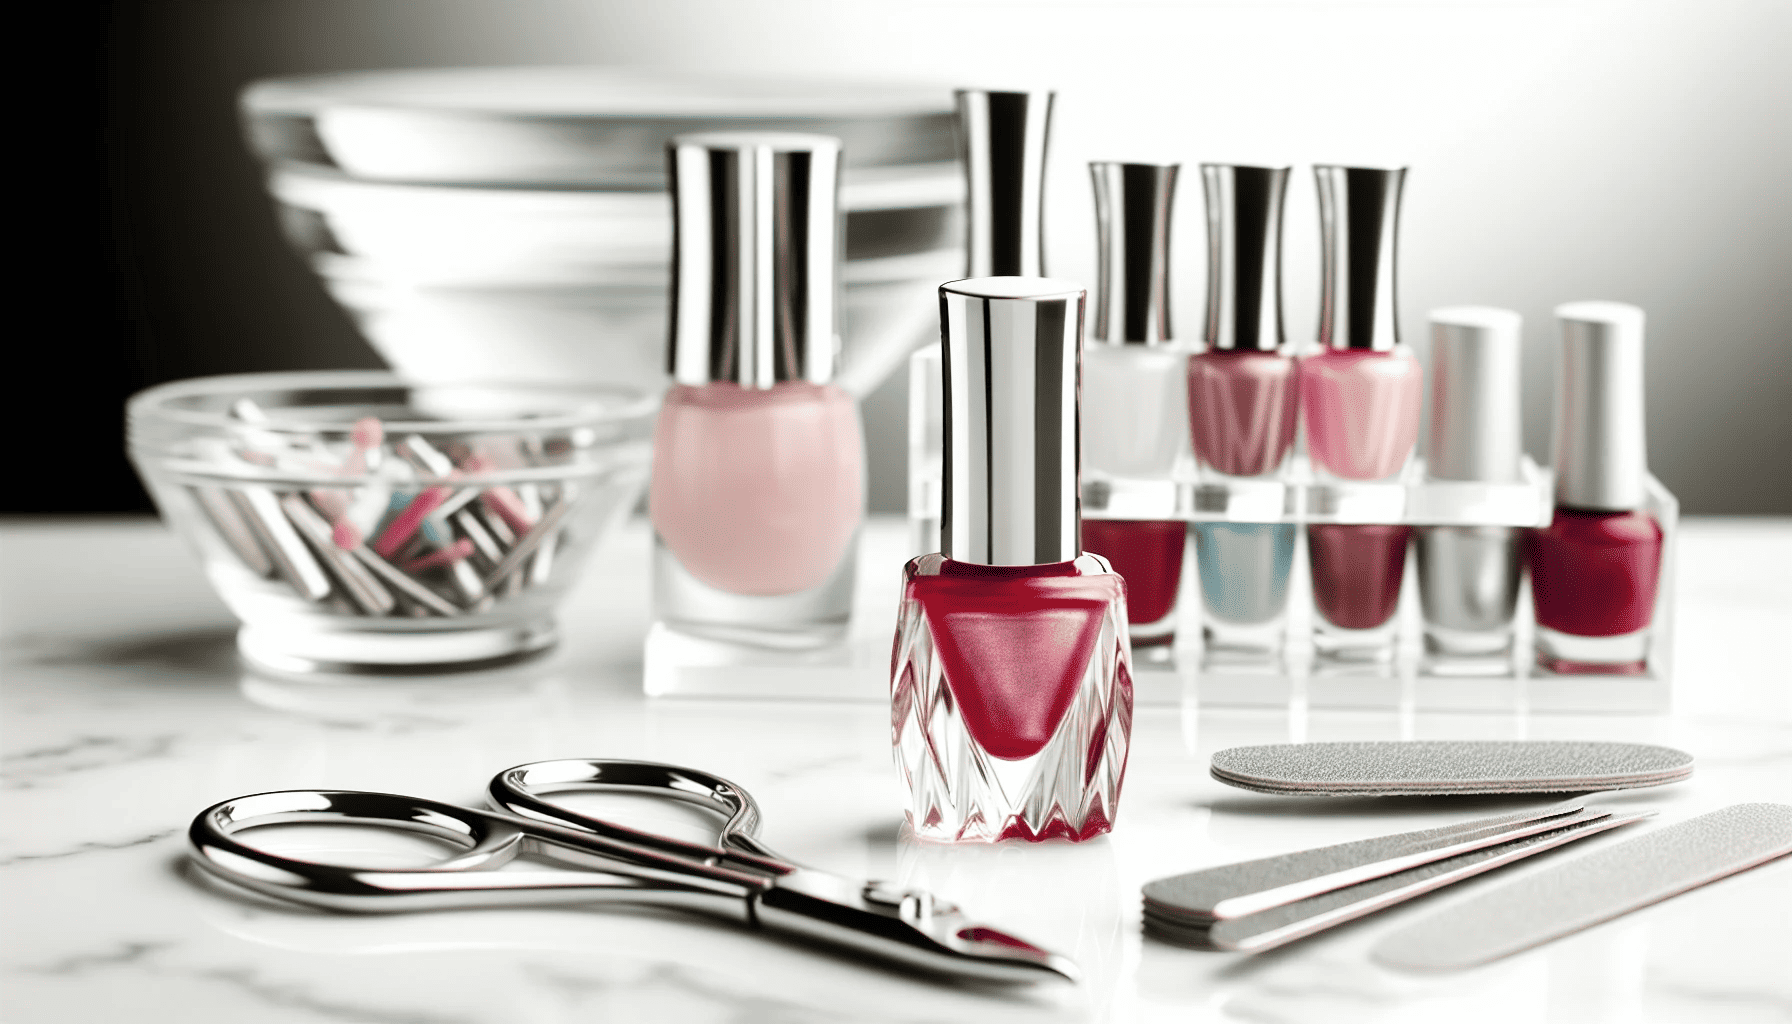 Elegant nail care products and accessories